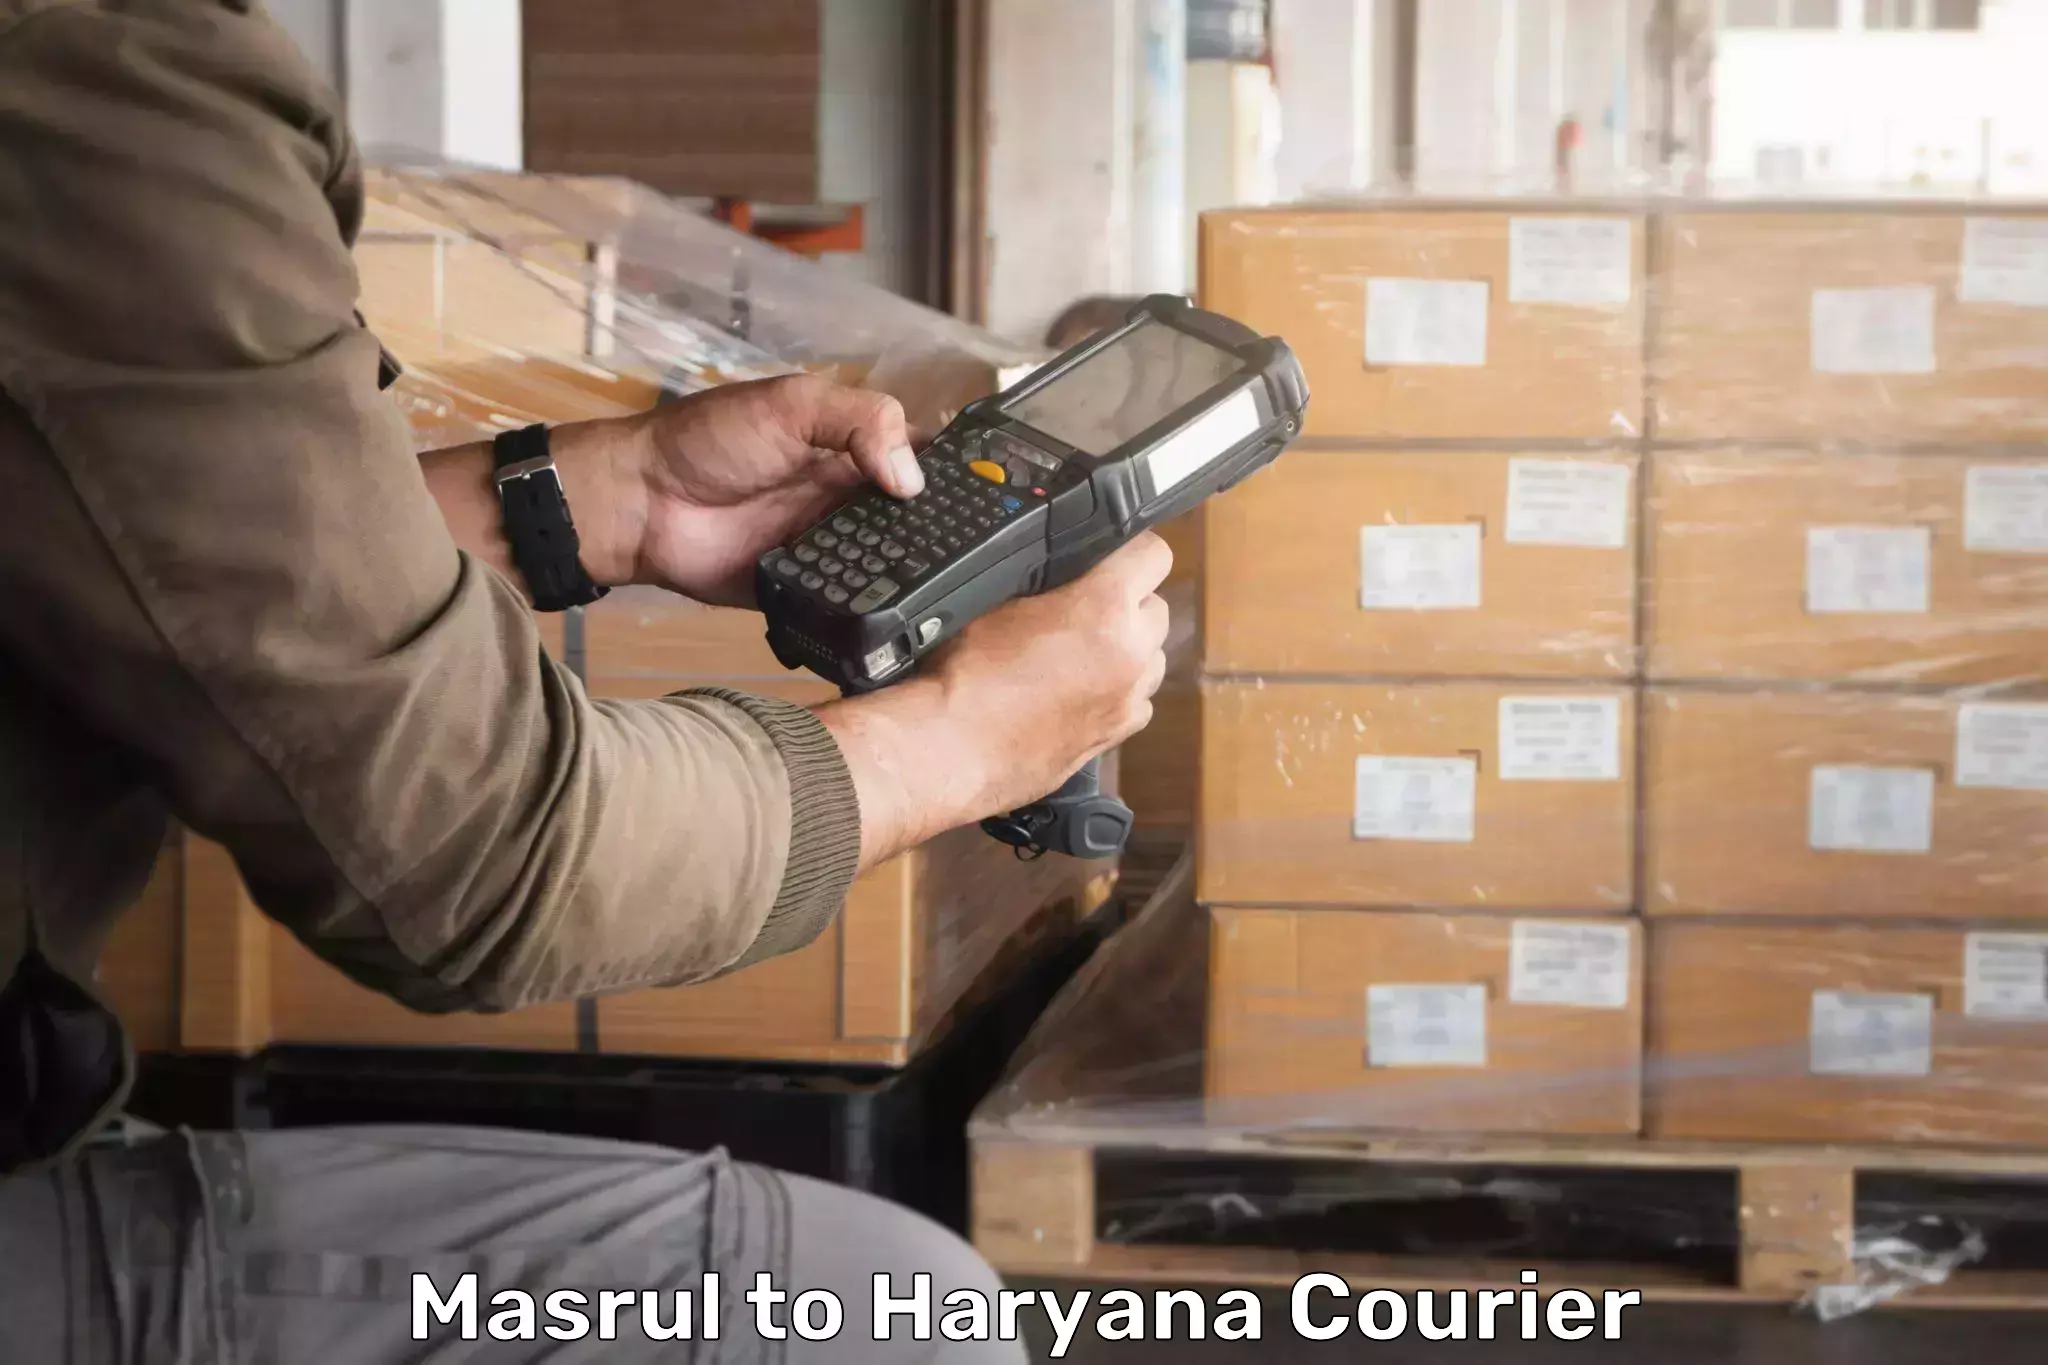 Automated parcel services Masrul to Chaudhary Charan Singh Haryana Agricultural University Hisar